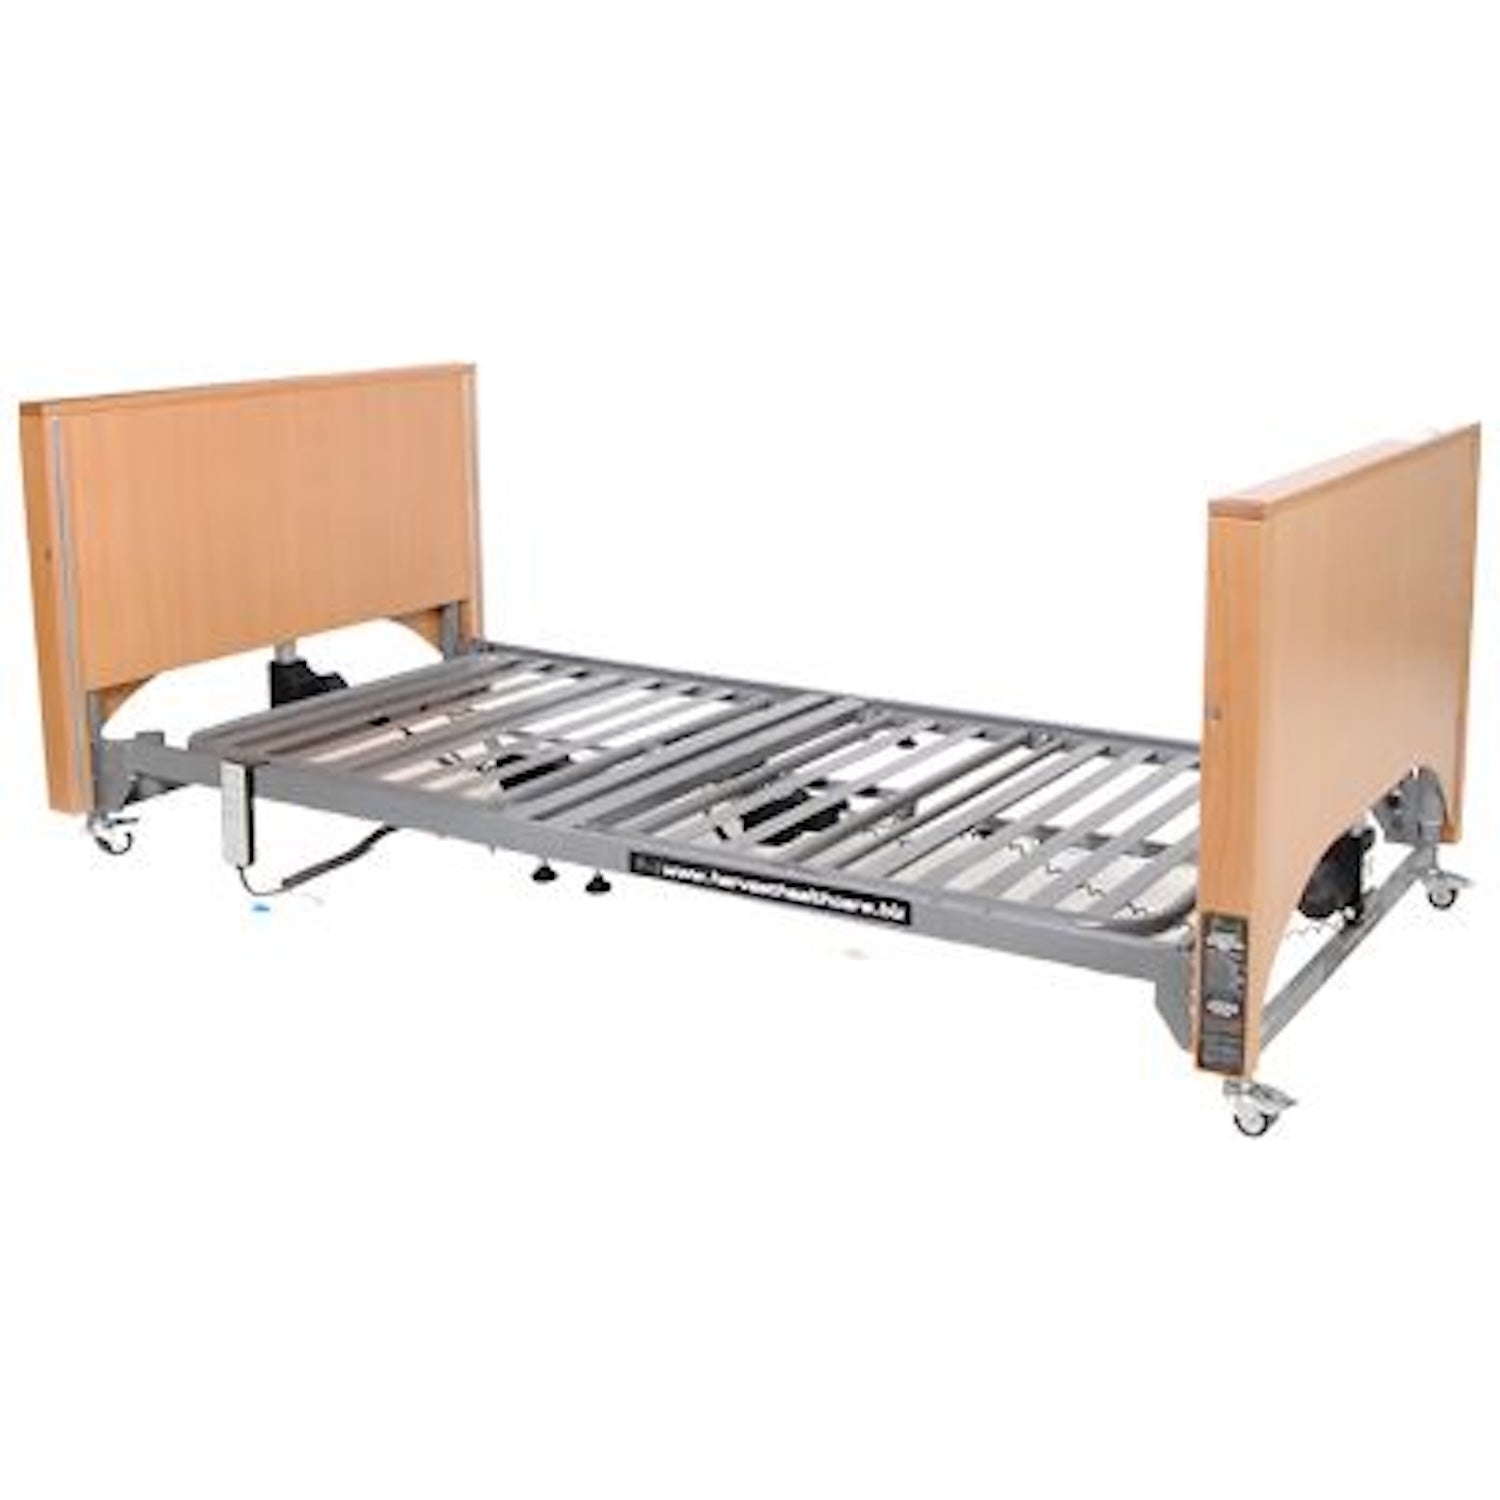 Woburn Low Profiling Bed (exc. Side rails)